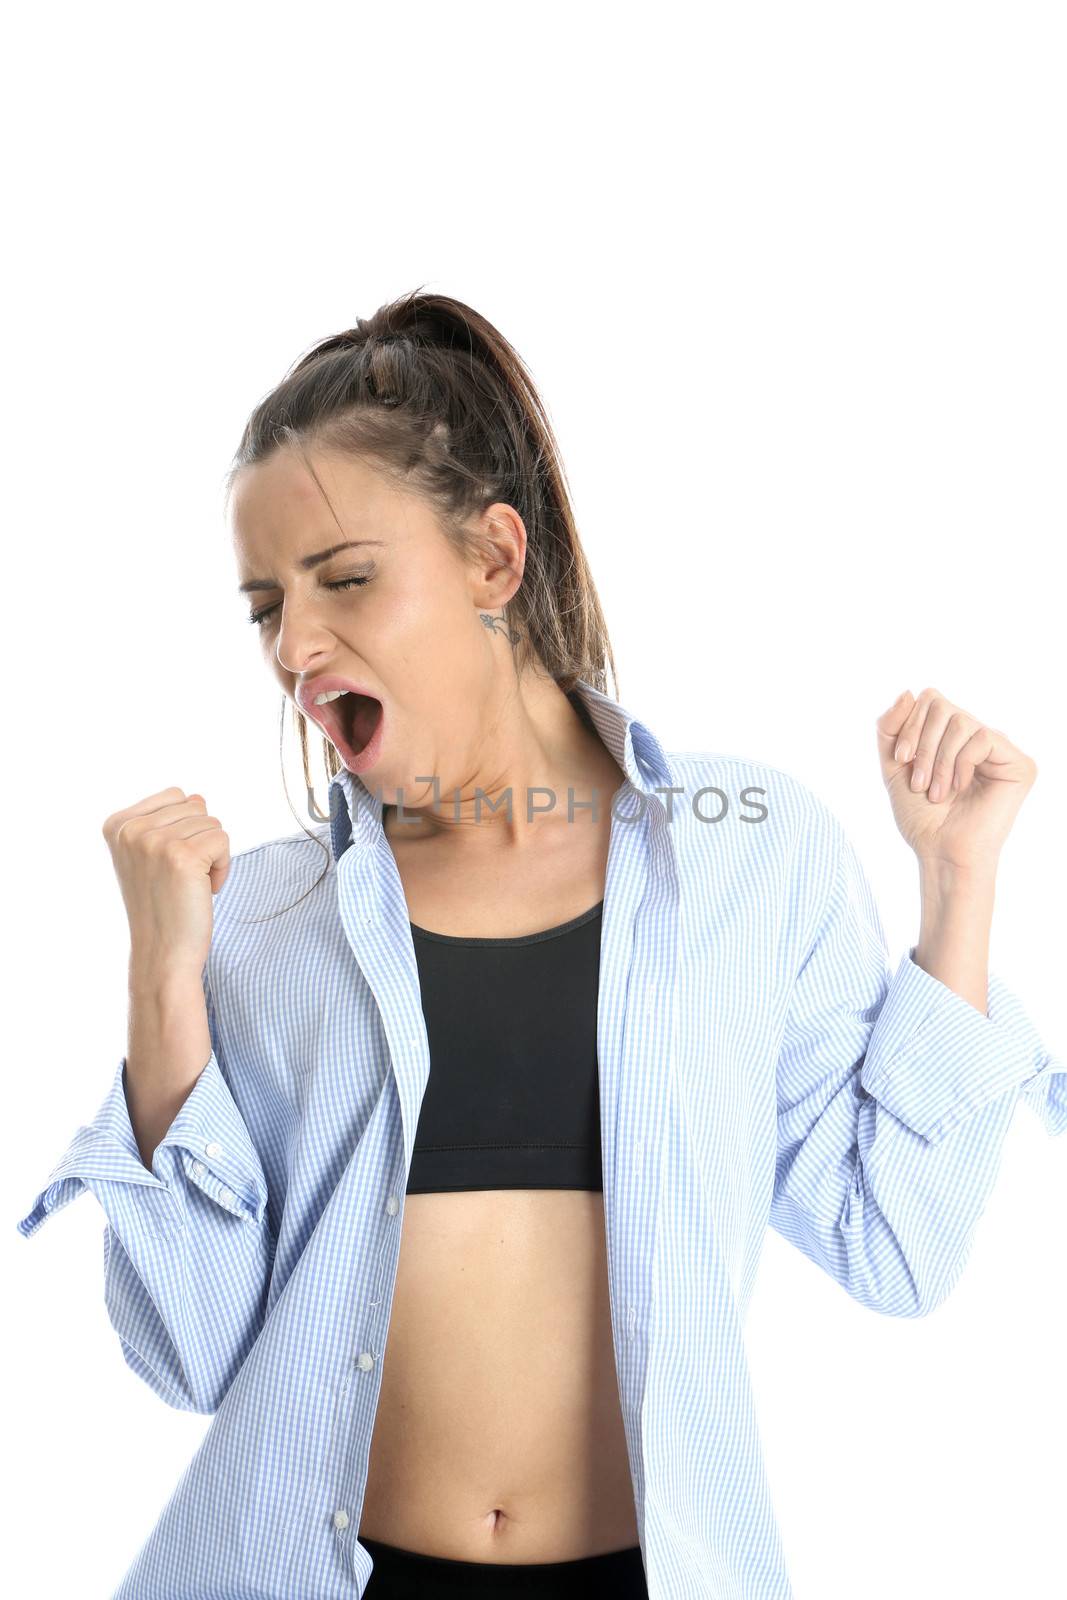 Model Released. Woman Yawning